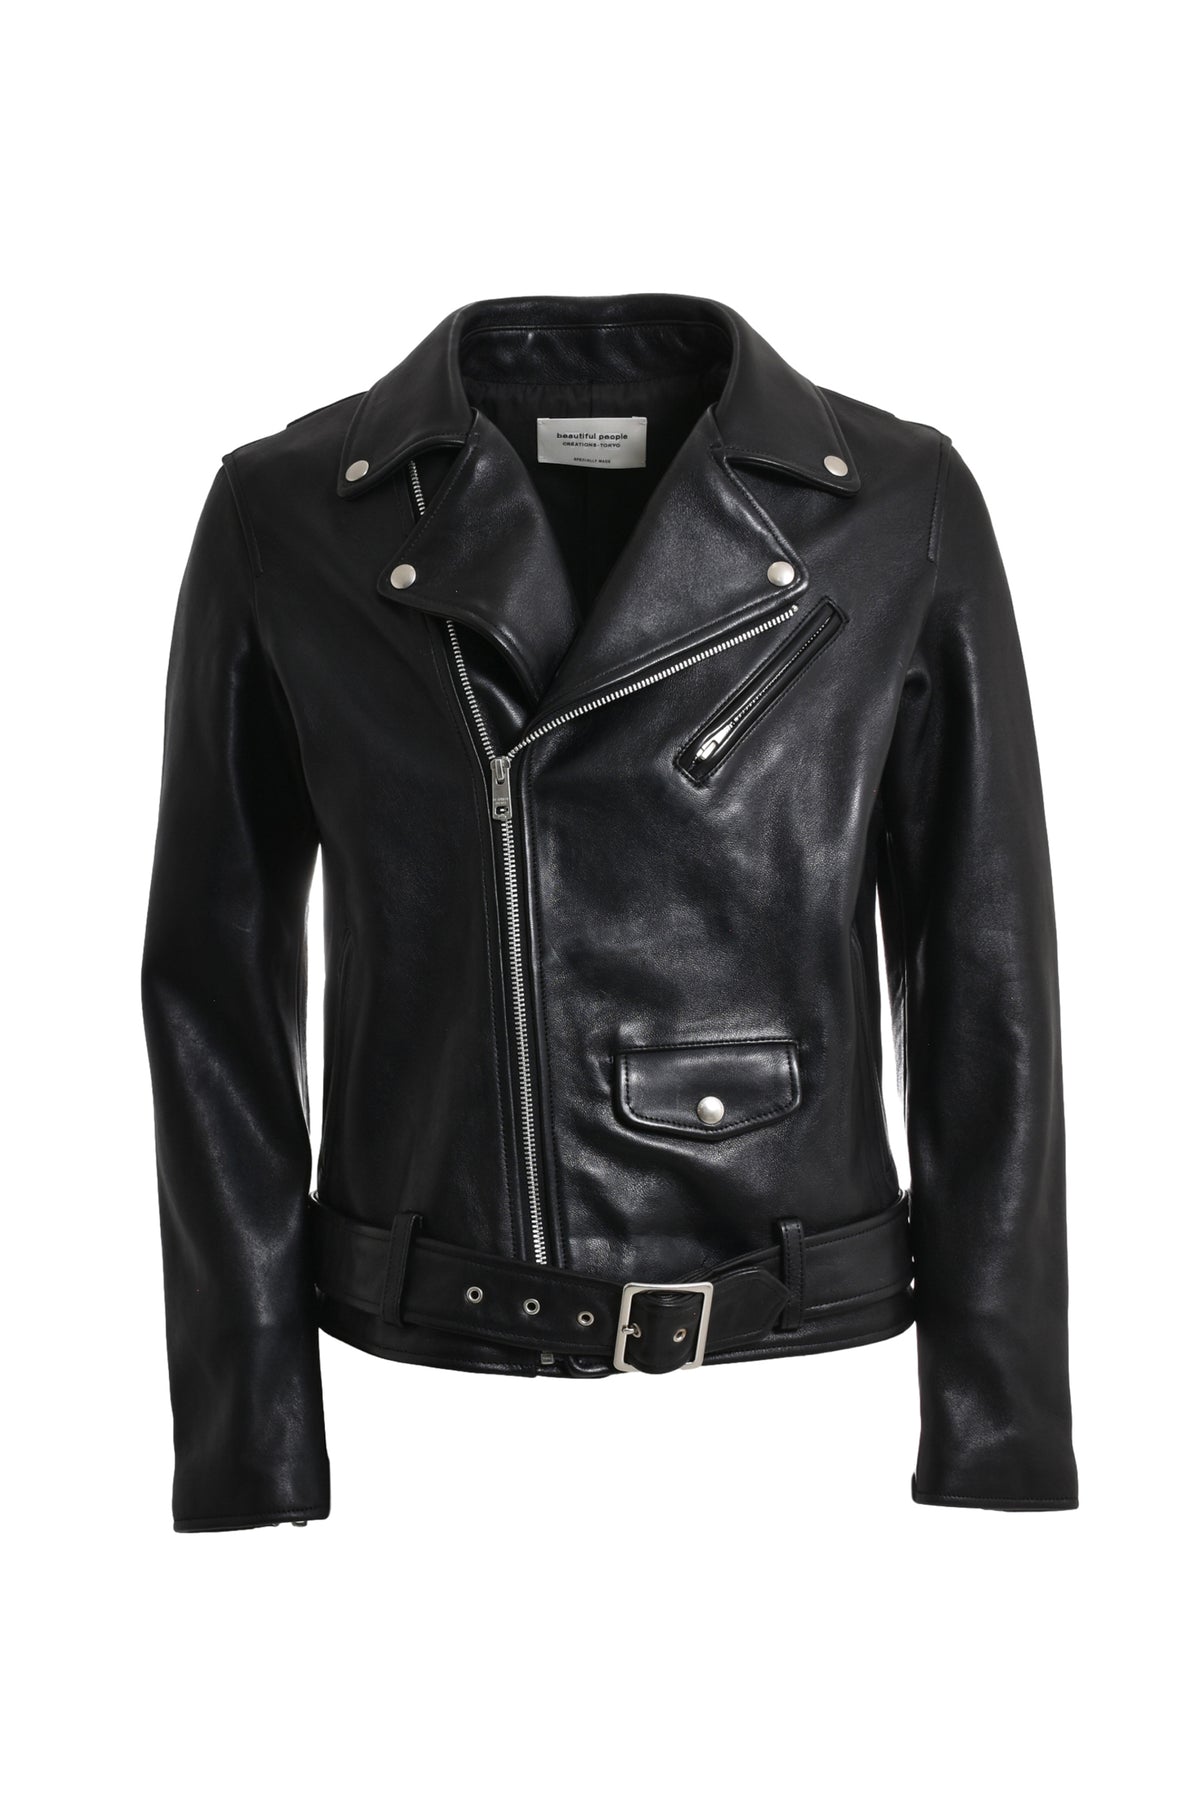 VINTAGE LEATHER THE/A RIDERS JACKET / BLK